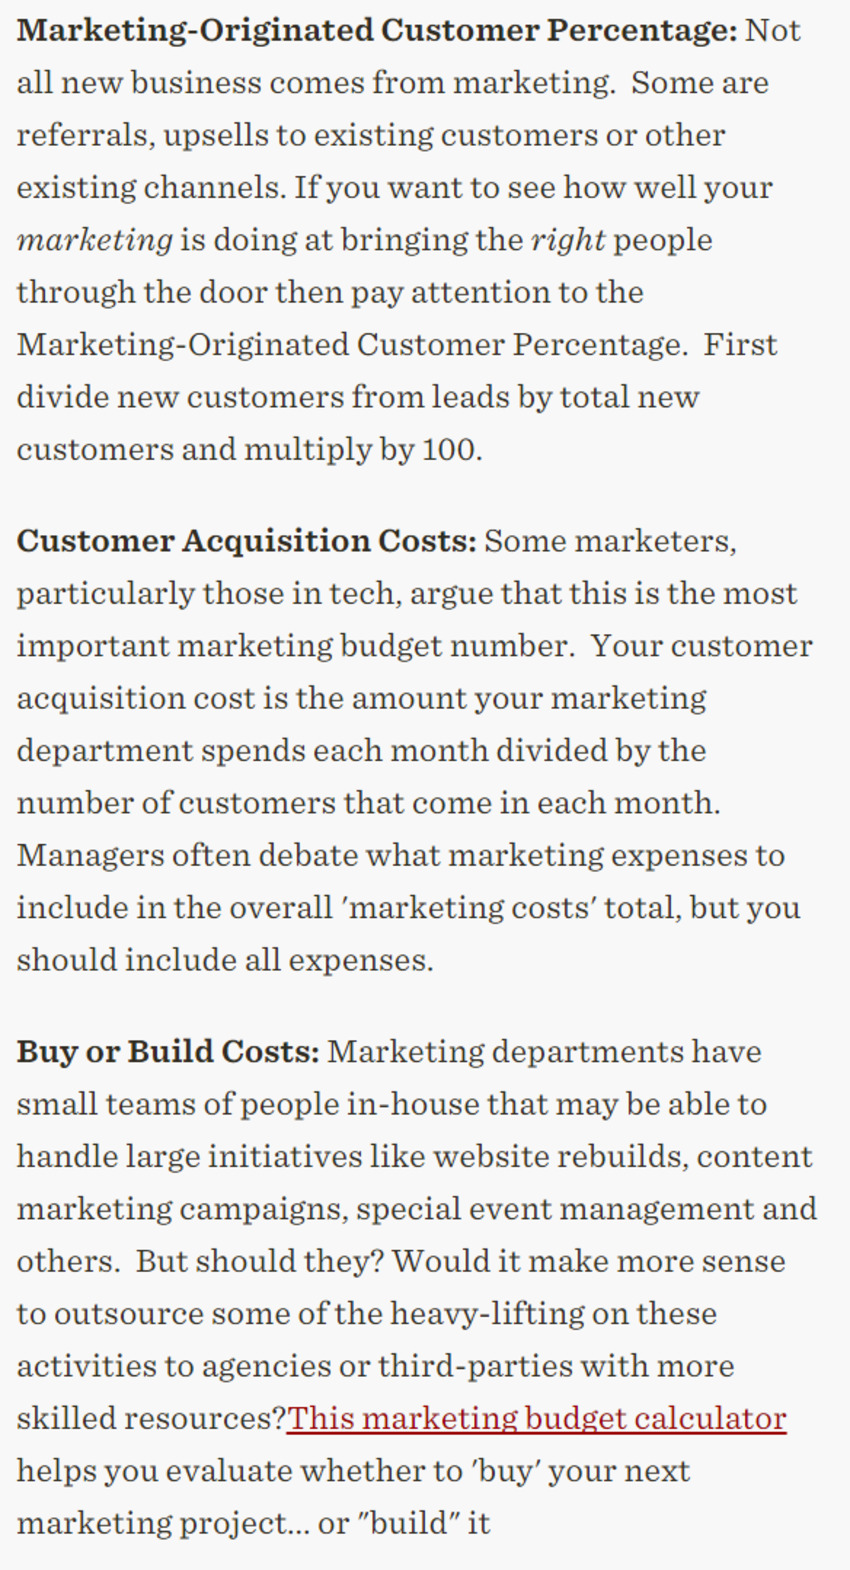 3 Key Marketing Budget Numbers - HuffPost | The MarTech Digest | Scoop.it